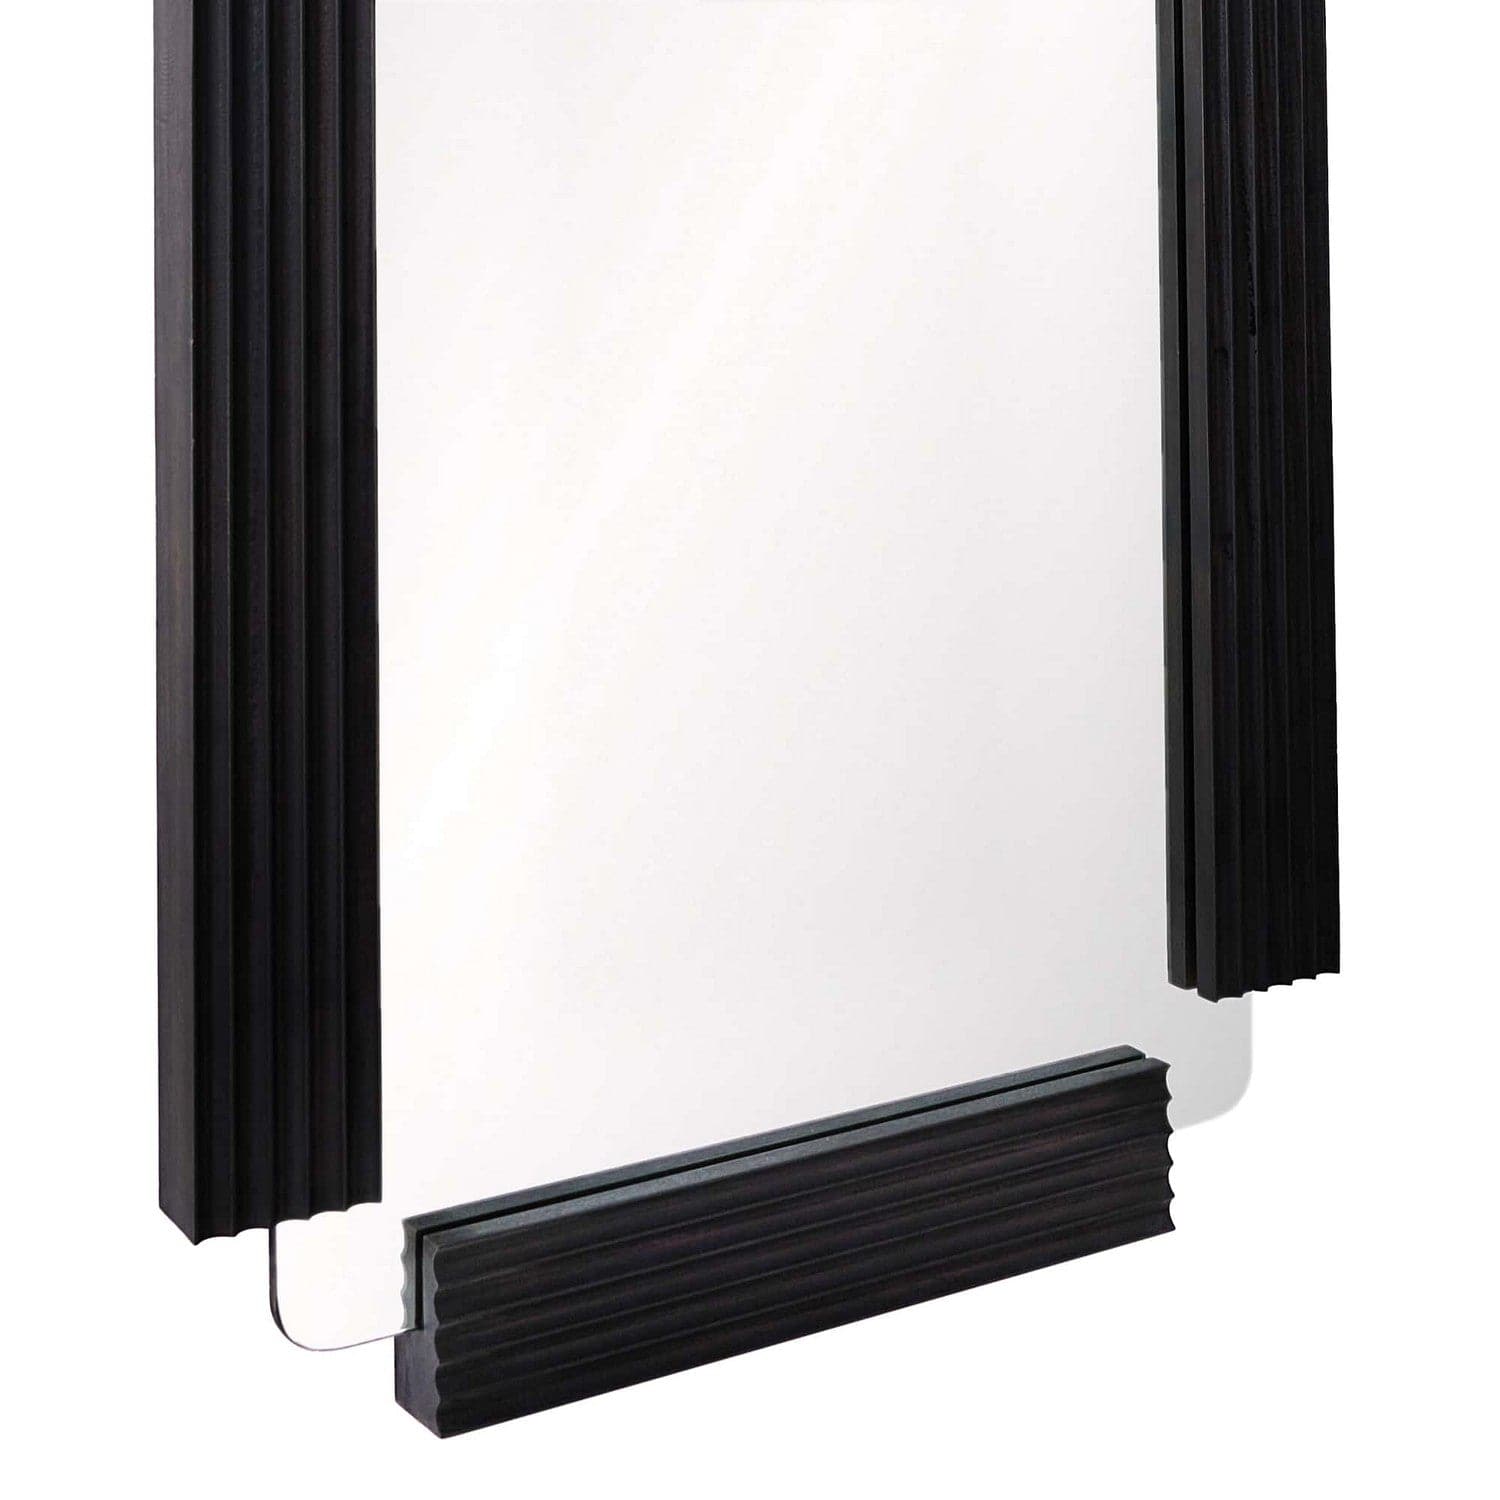 Floor Mirror from the Weller collection in Ebony finish